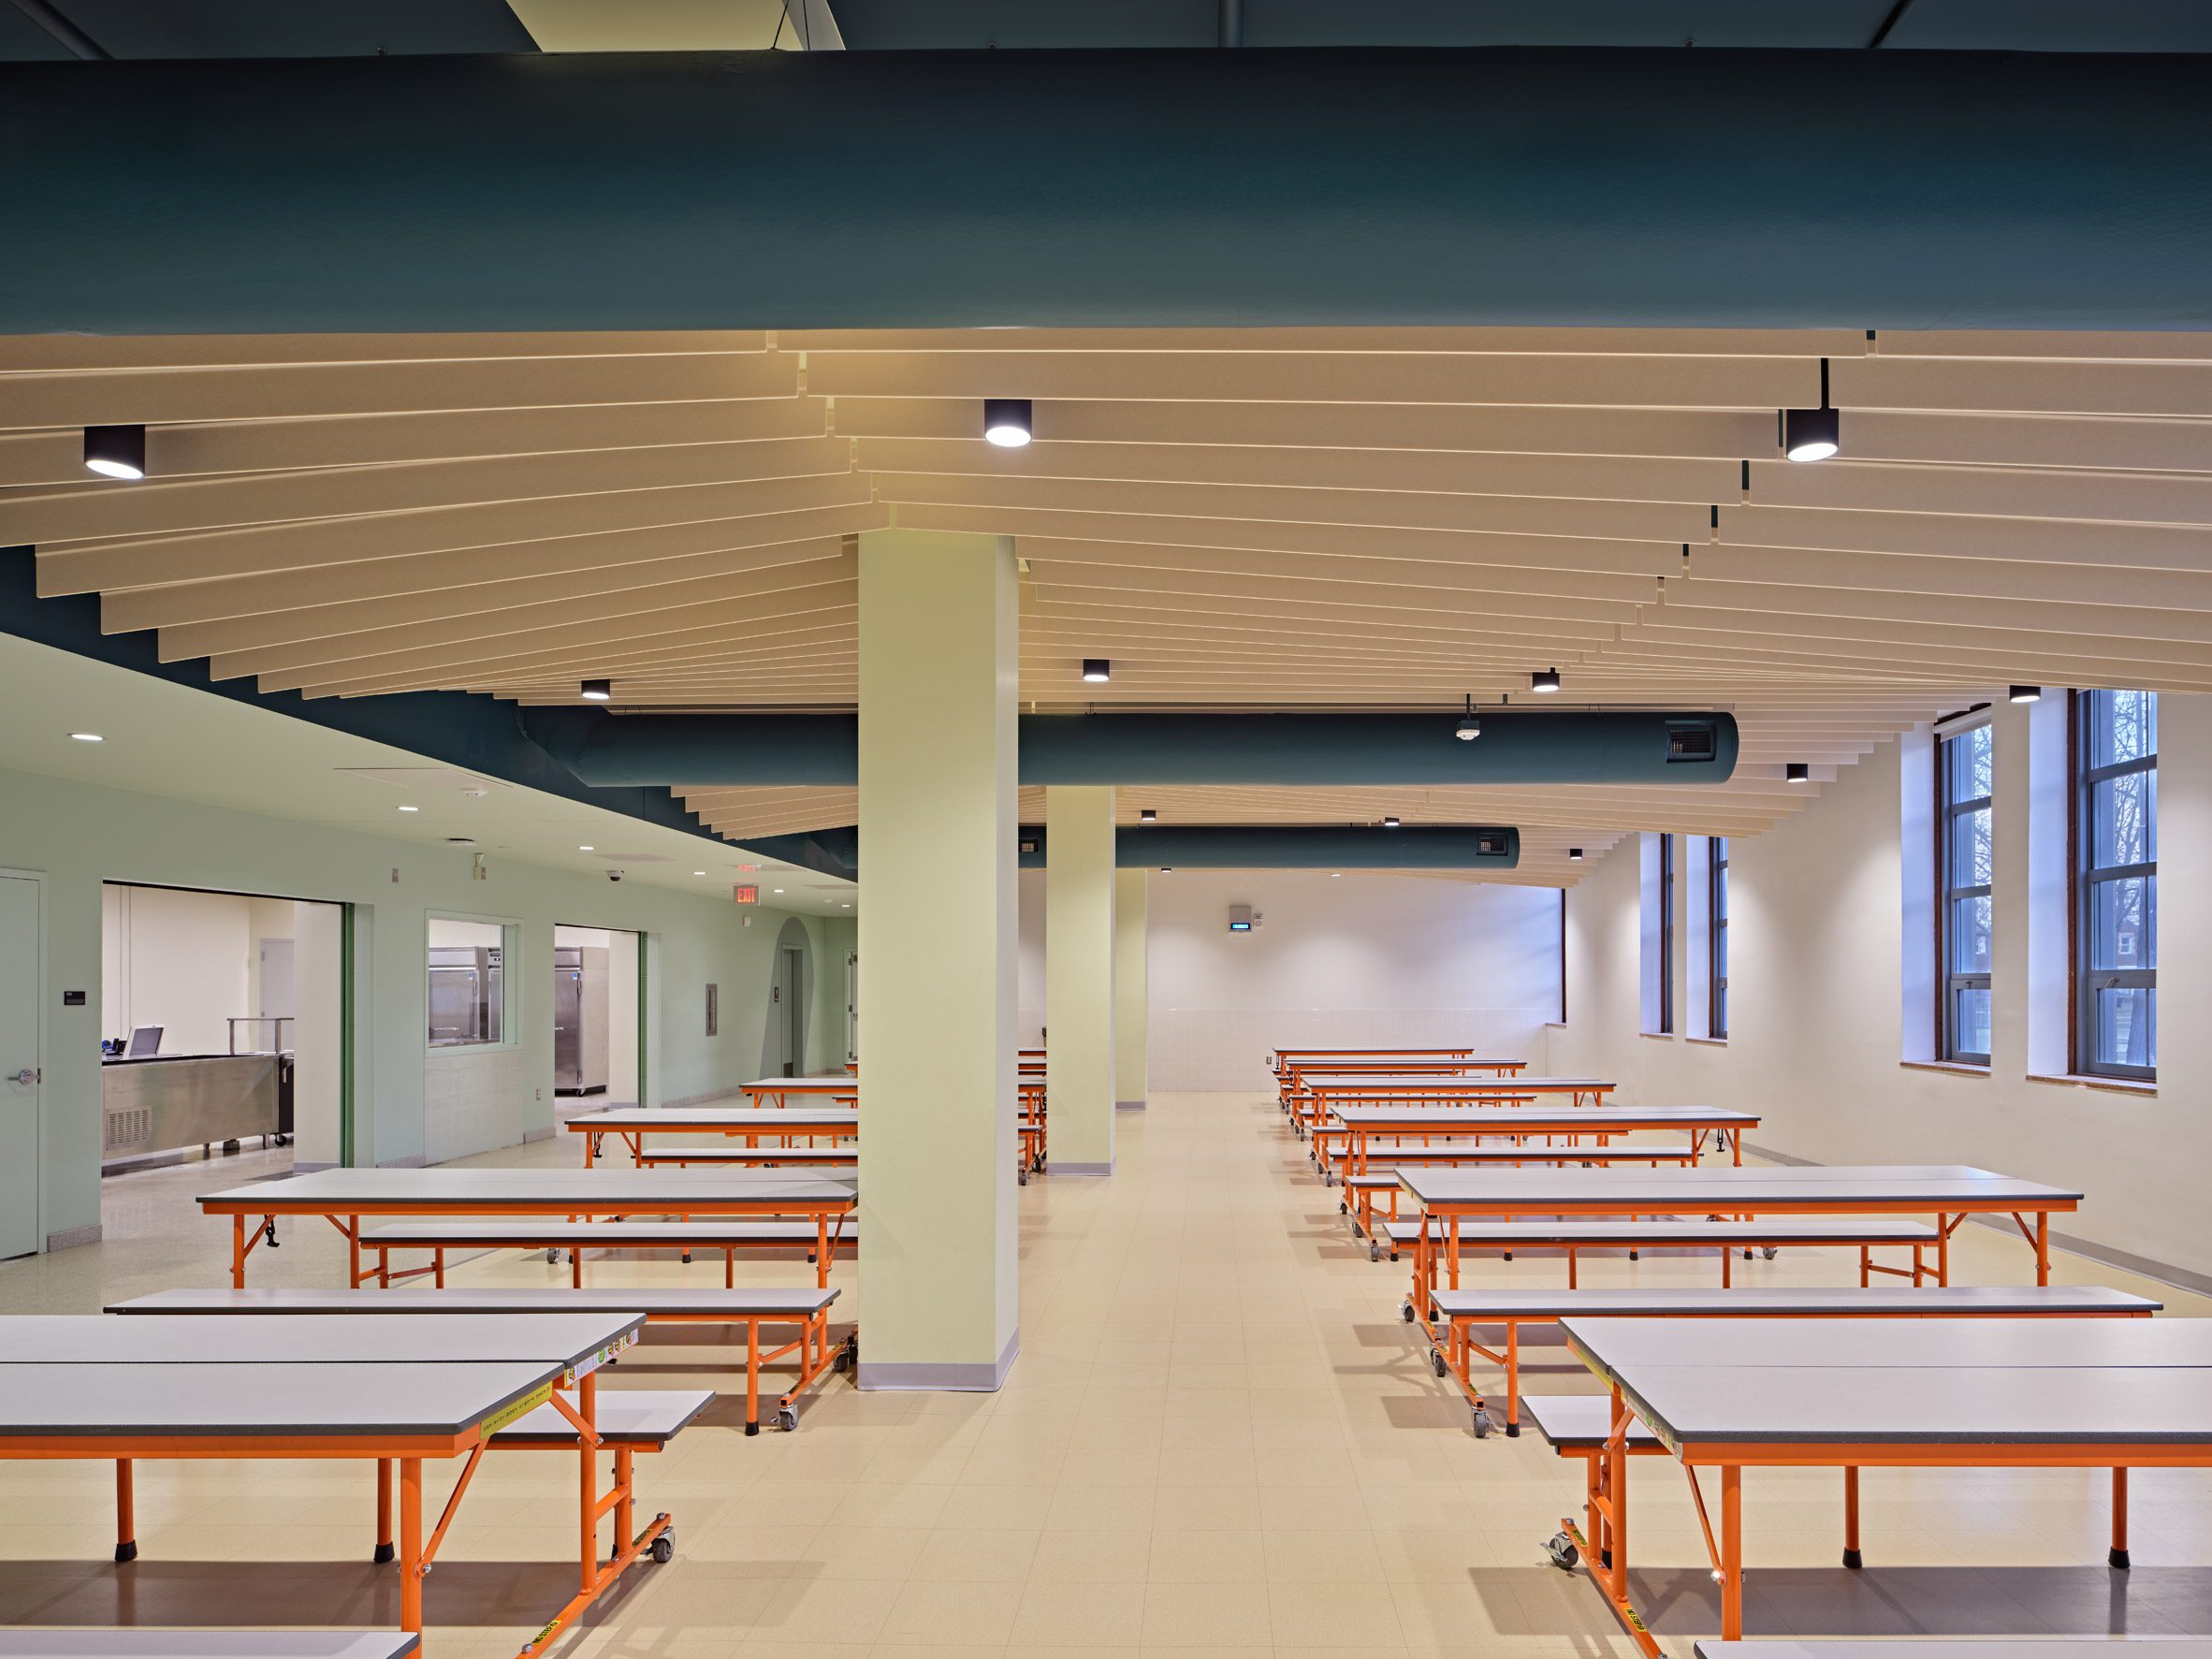 Slatted ceilings and lunch tables